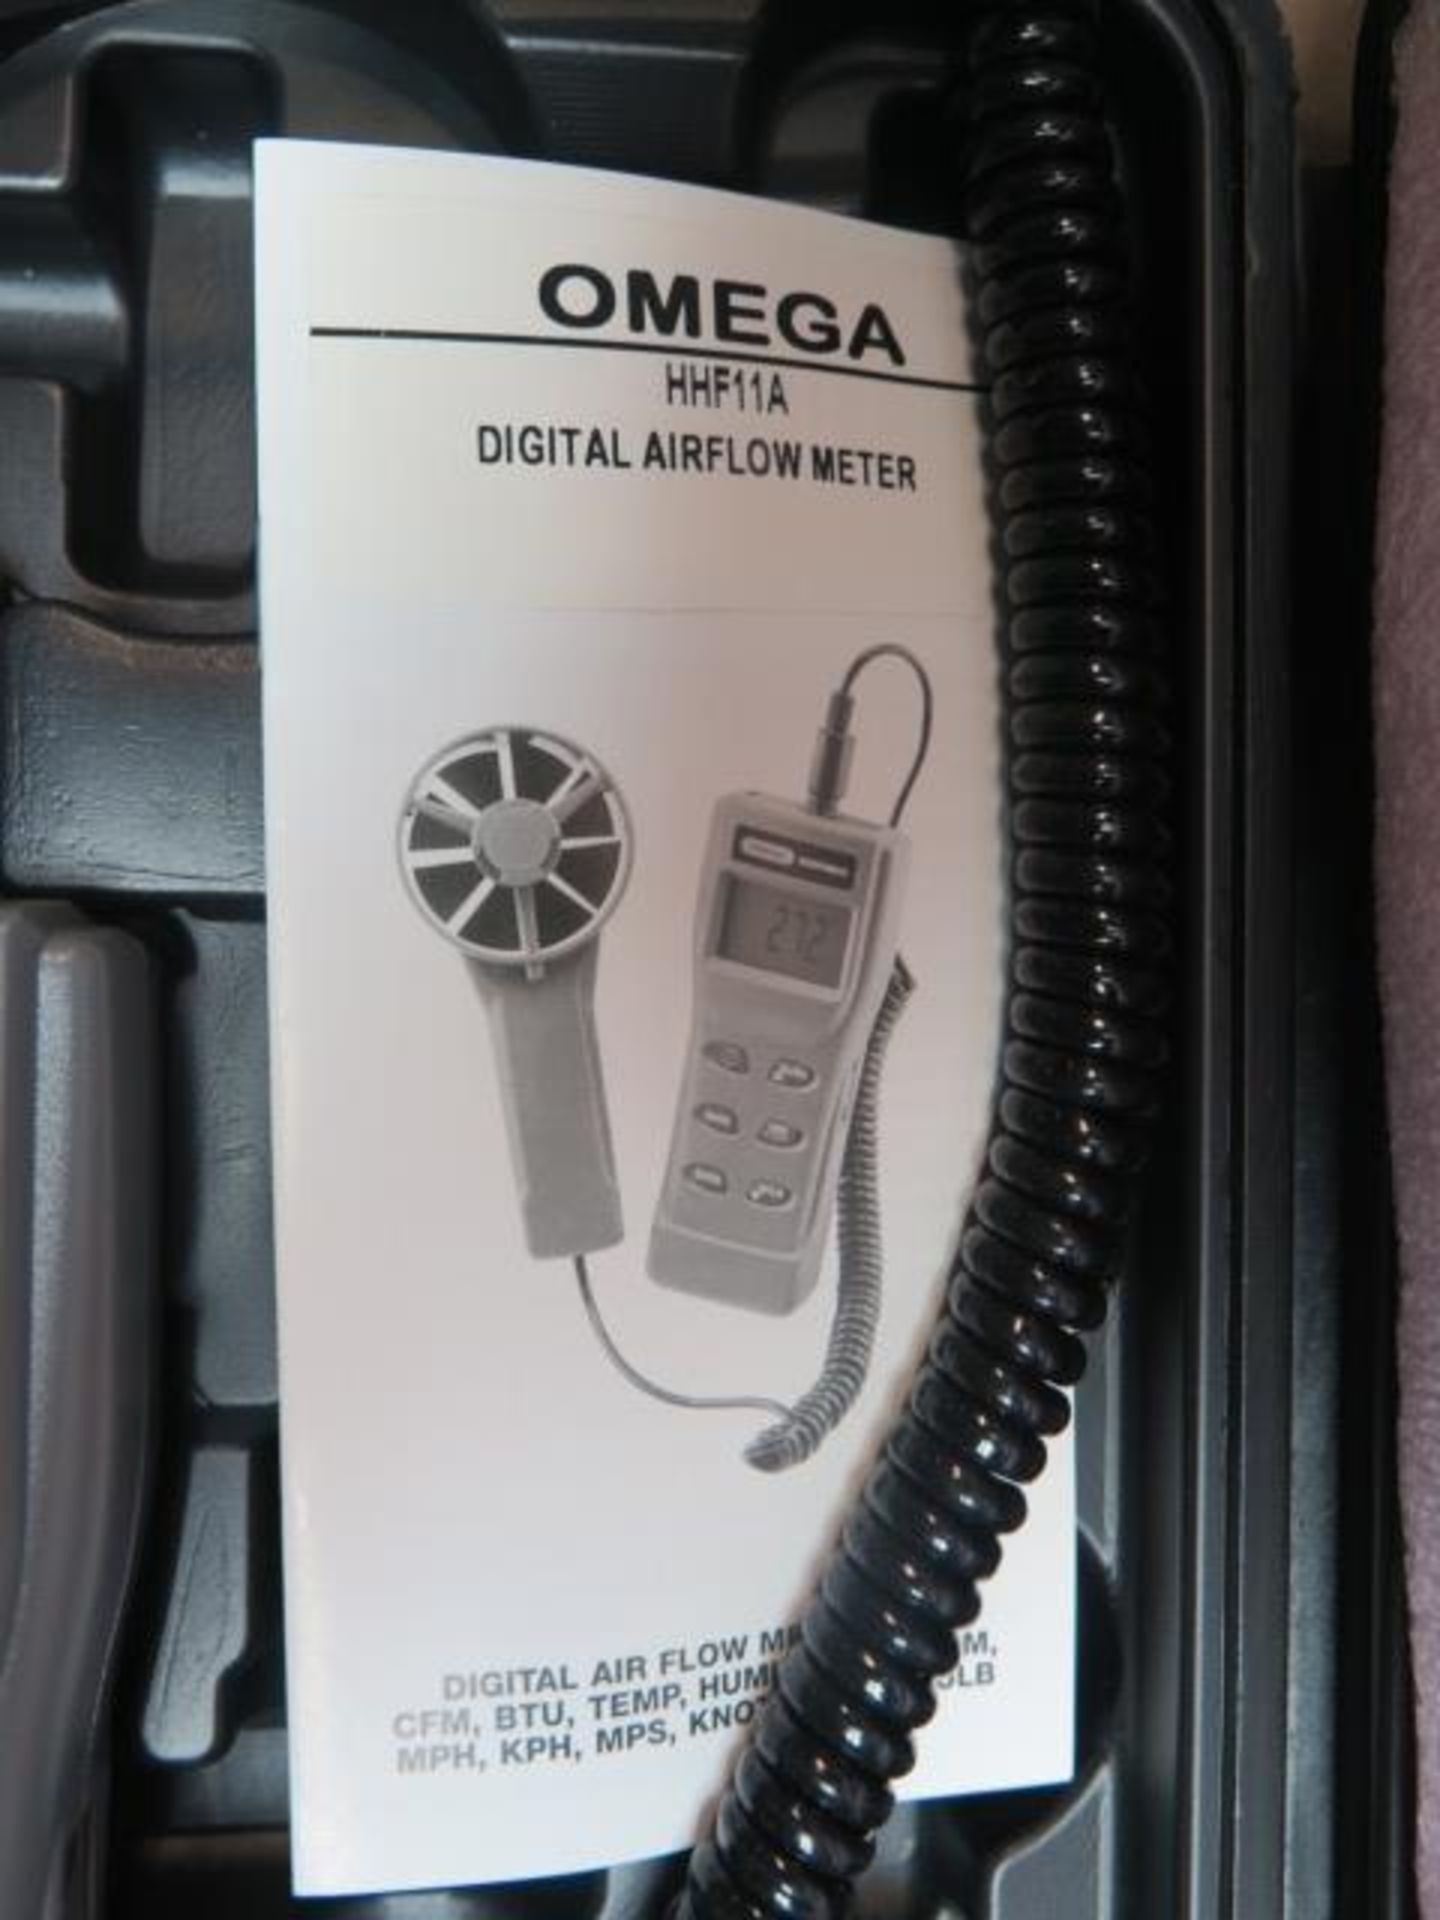 Omega HHF11A Digital Air Flow Meter (SOLD AS-IS - NO WARRANTY) - Image 5 of 5